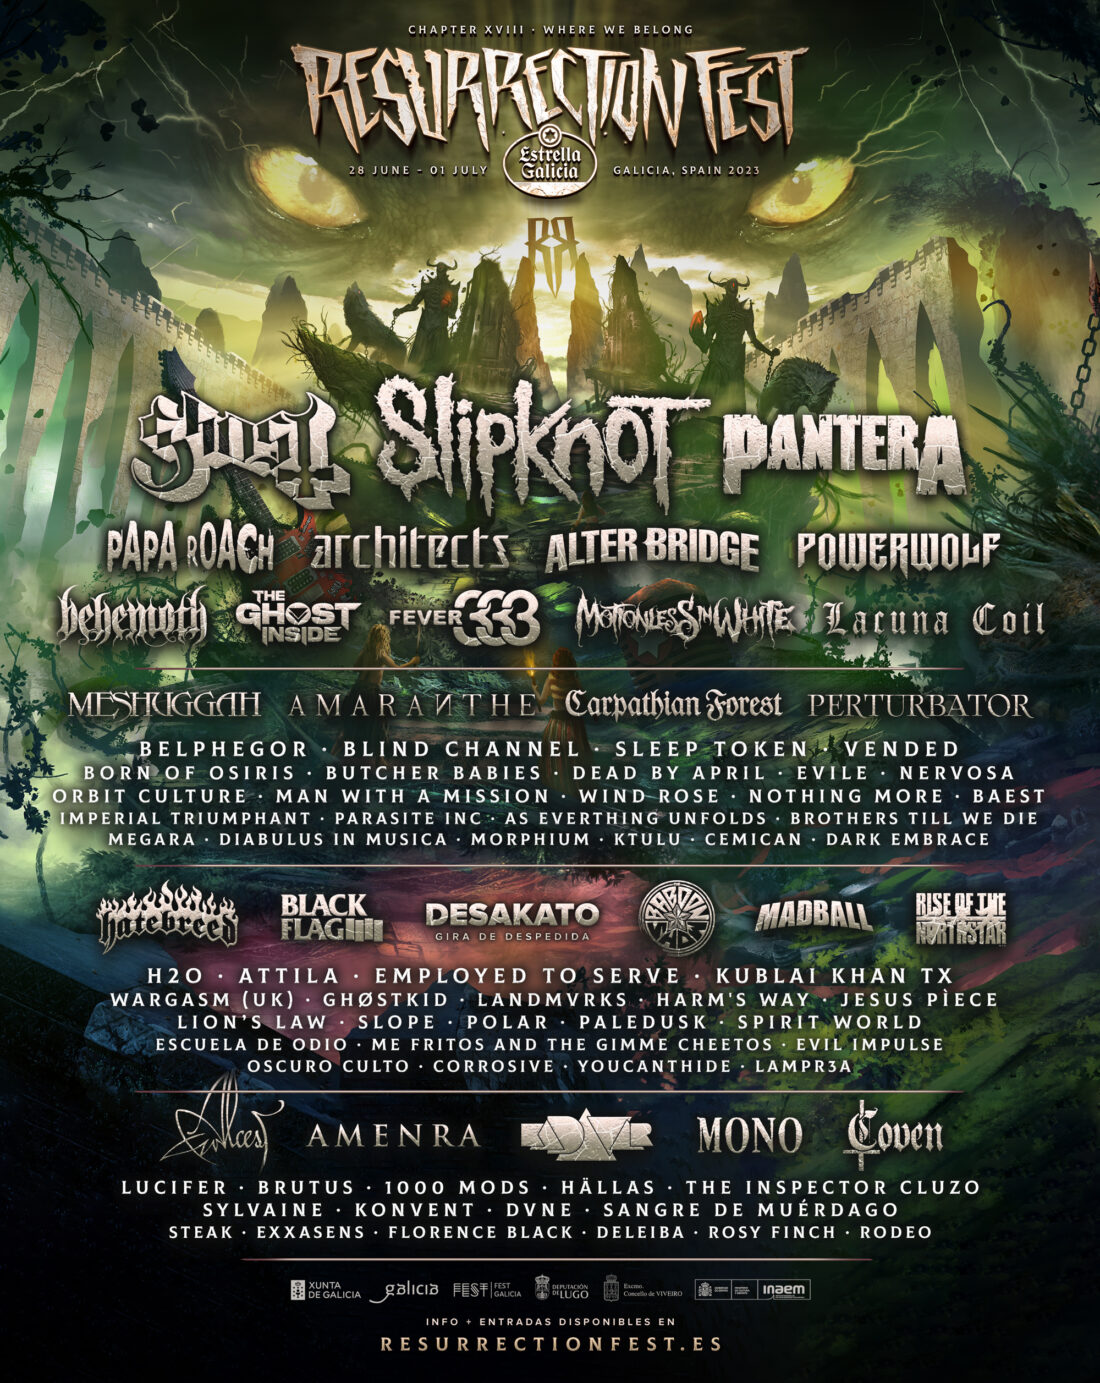 Resurrection Fest Estrella Galicia 2023: Slipknot, Pantera and Ghost, among more than 80 new additions. Tickets tomorrow on sale